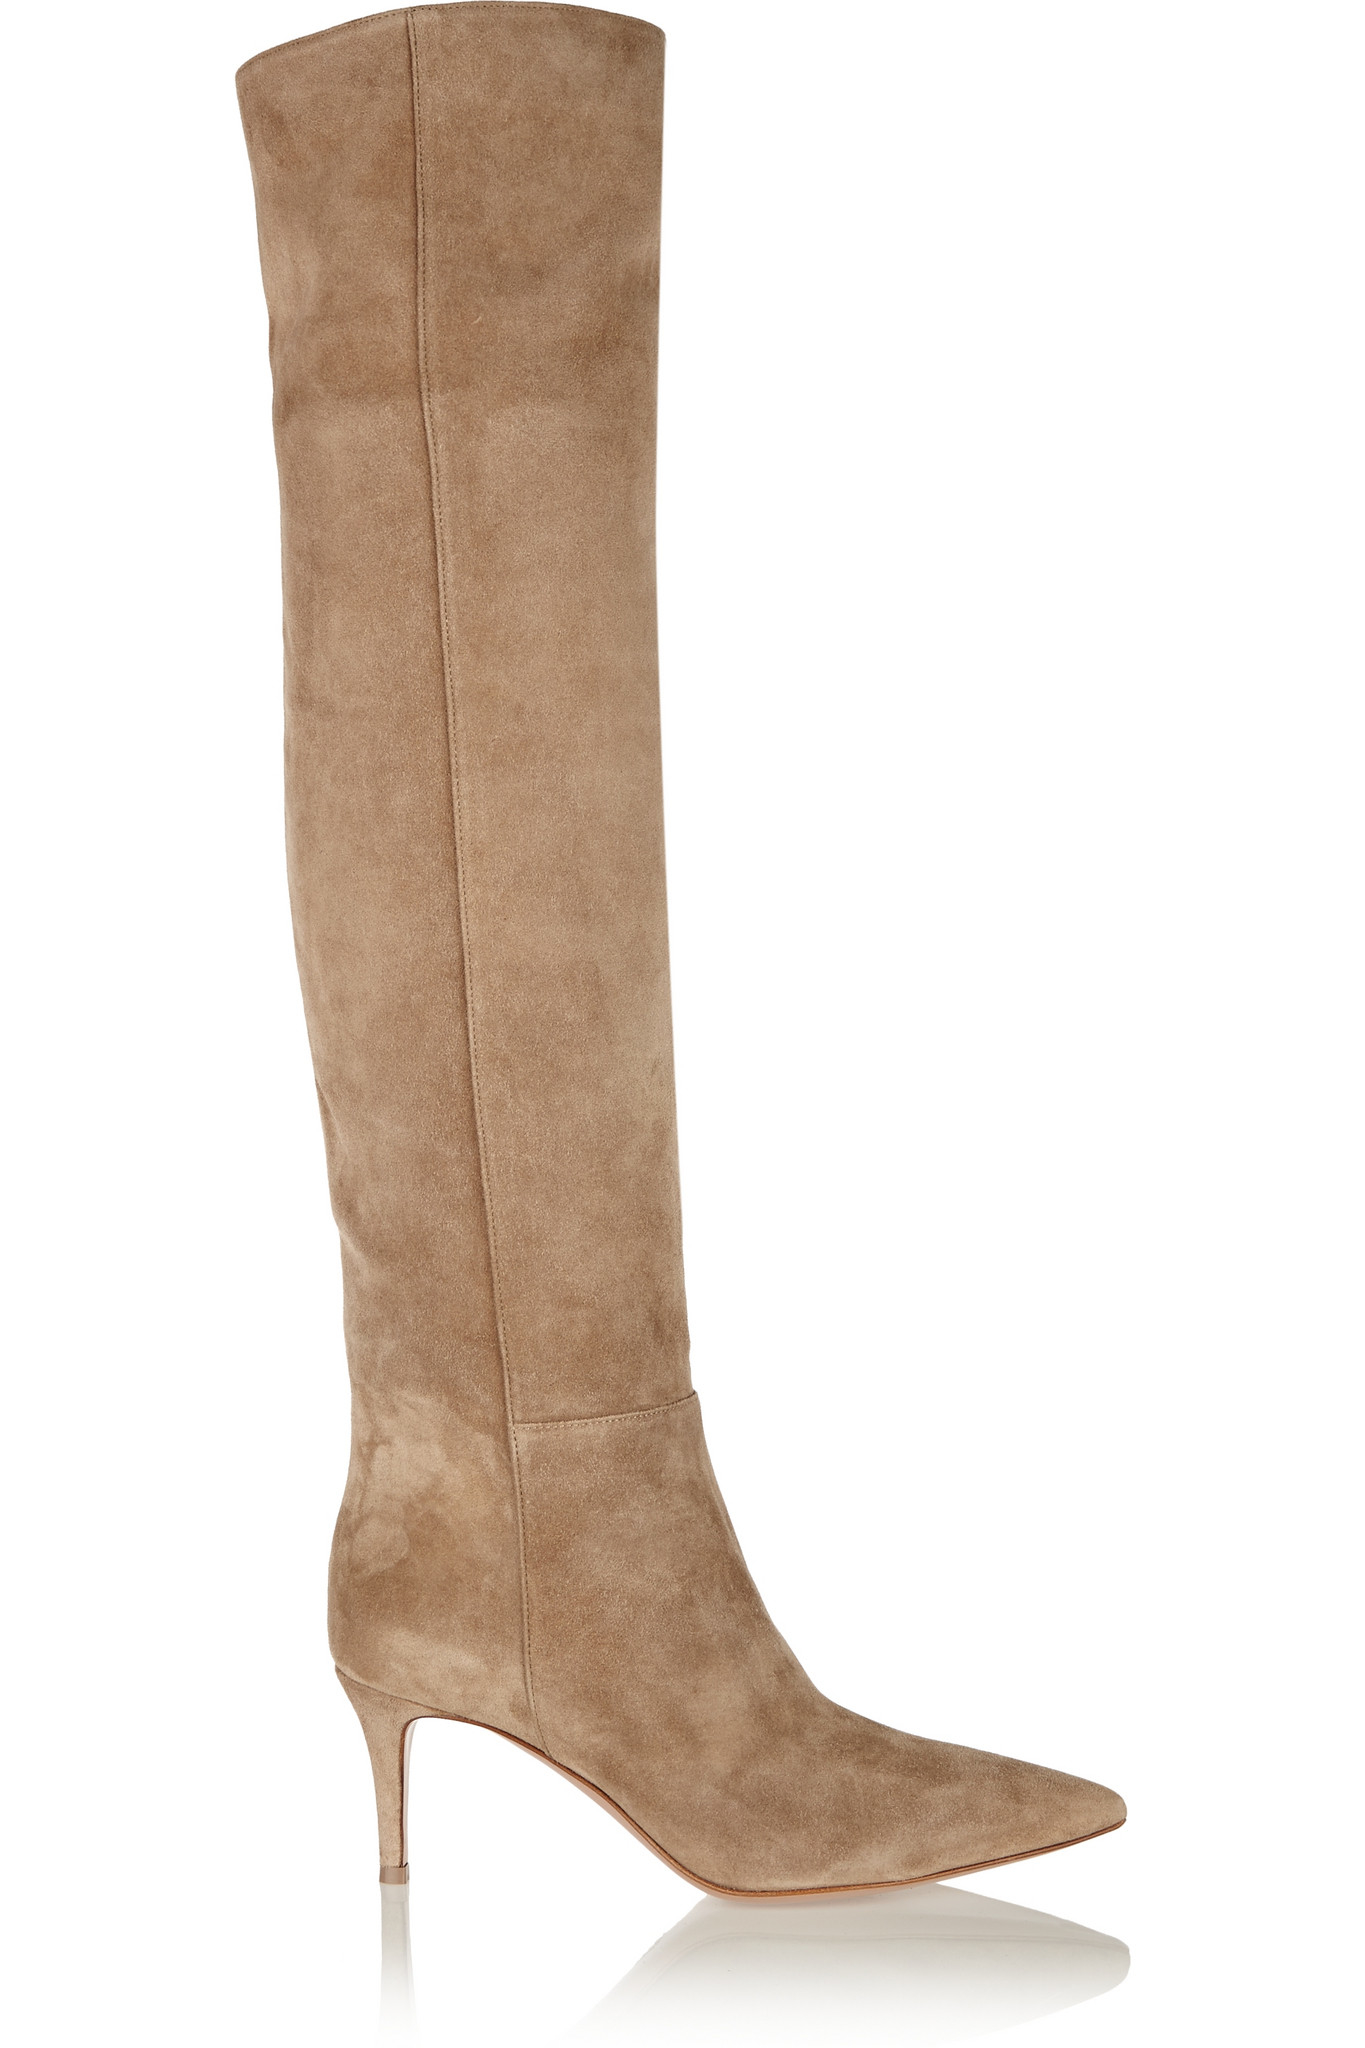 Gianvito Rossi - Suede Over-the-knee Boots - Beige in Natural - Lyst